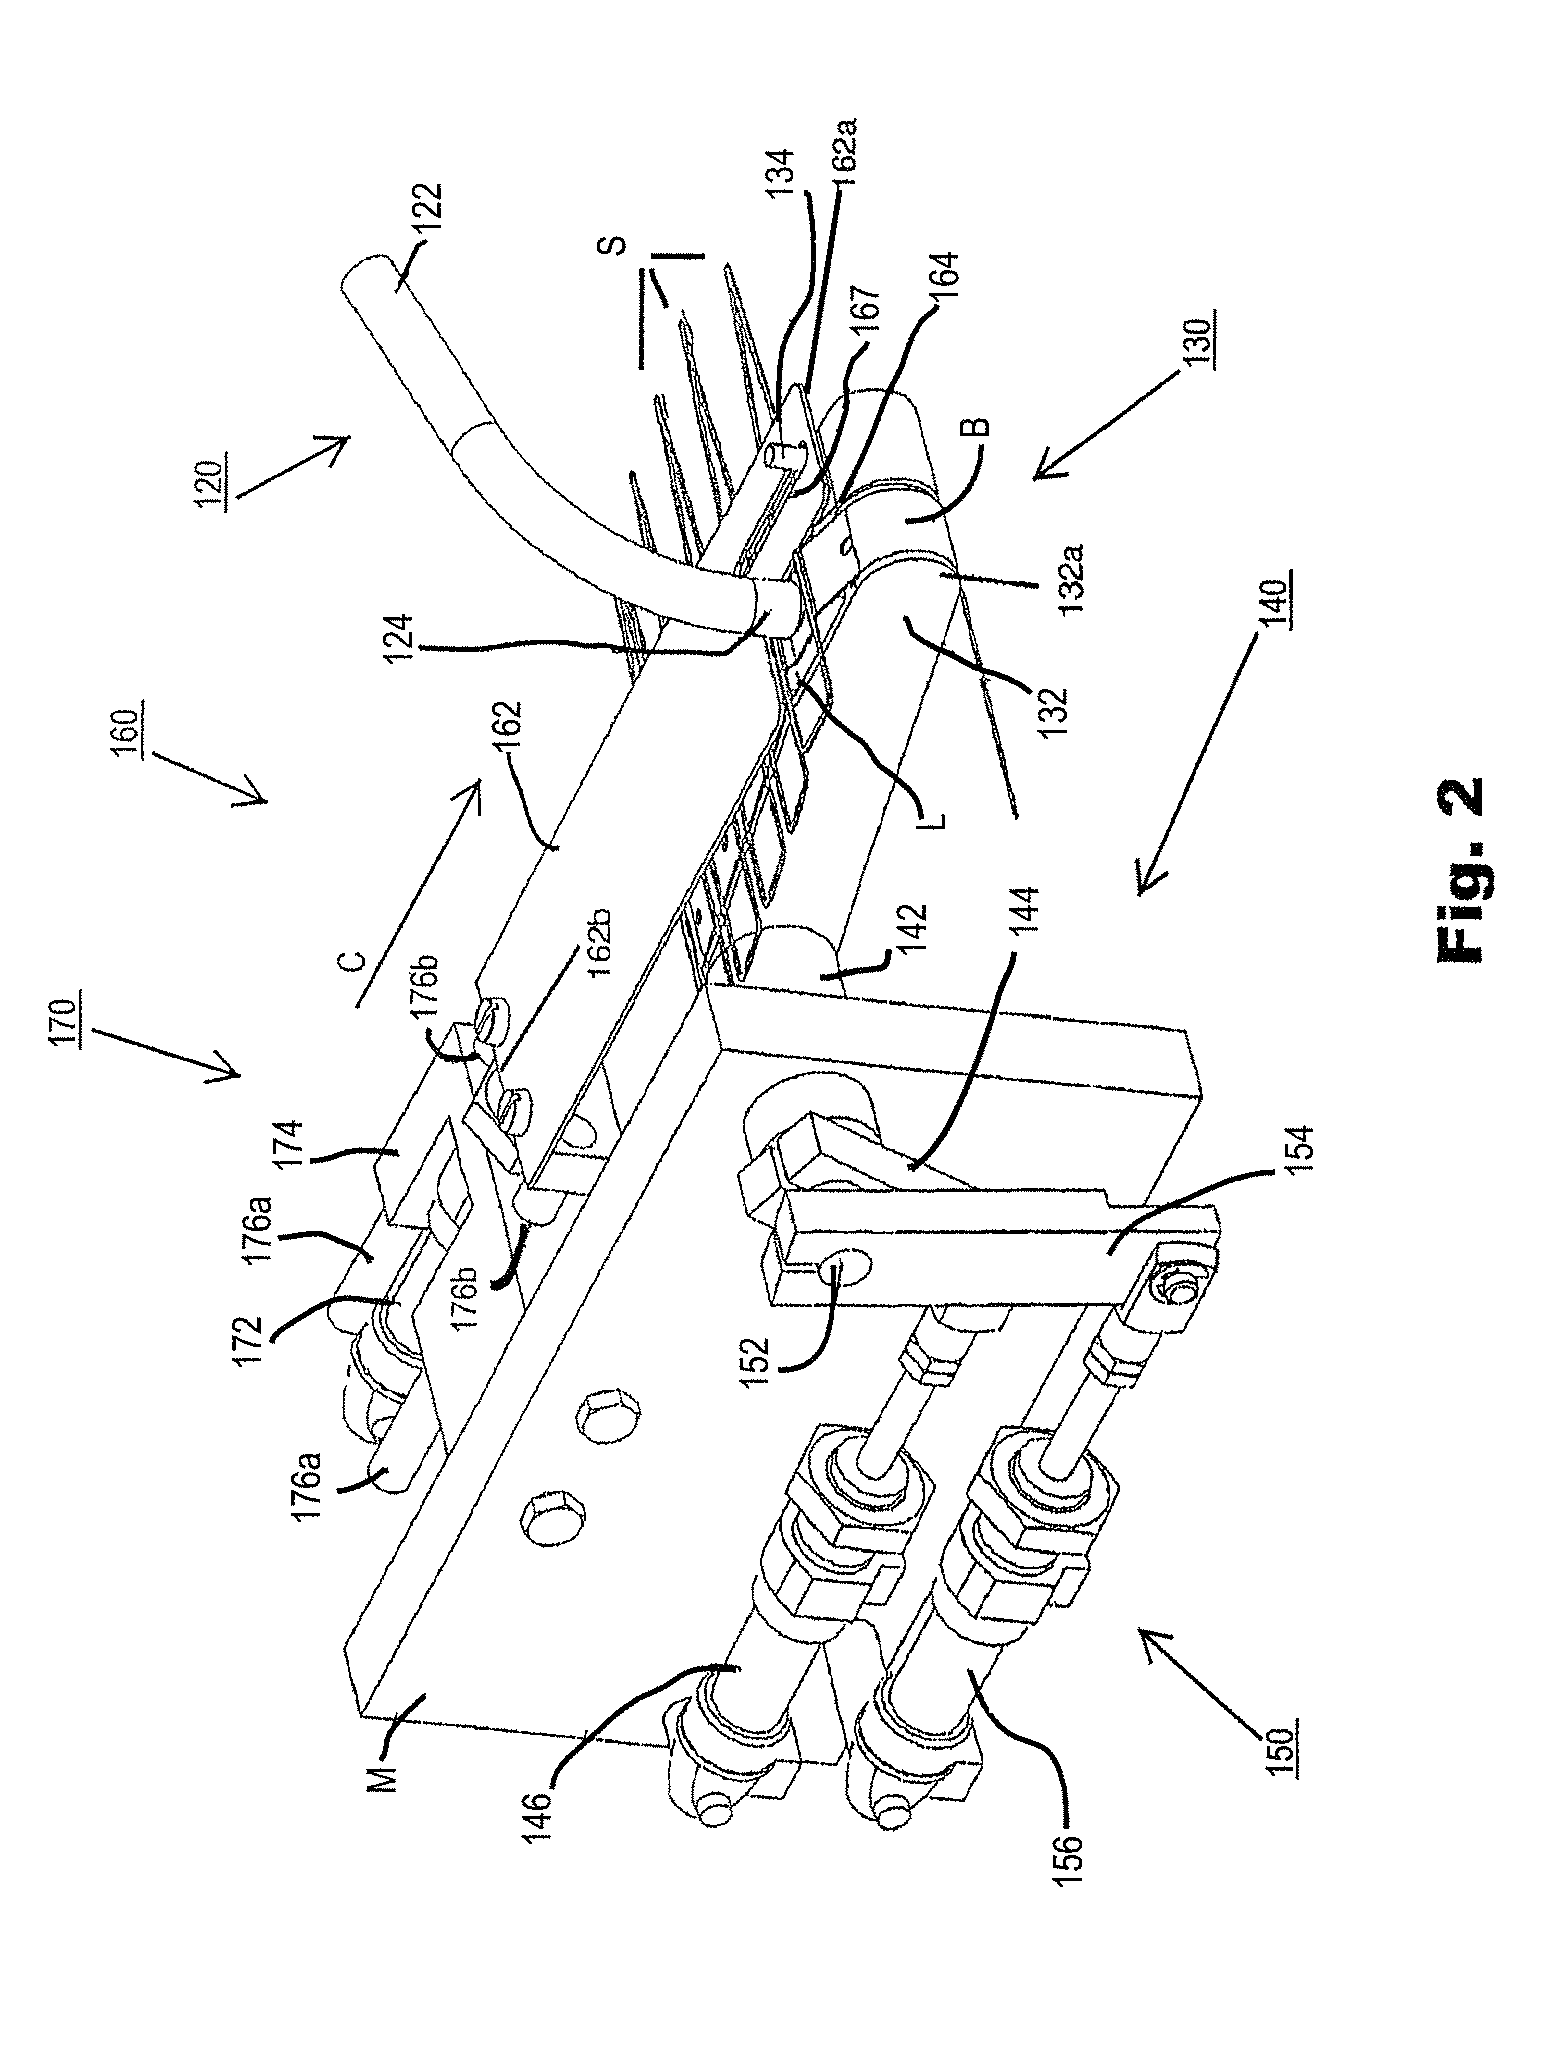 System and method for allowing a quality check of sausage-shaped products